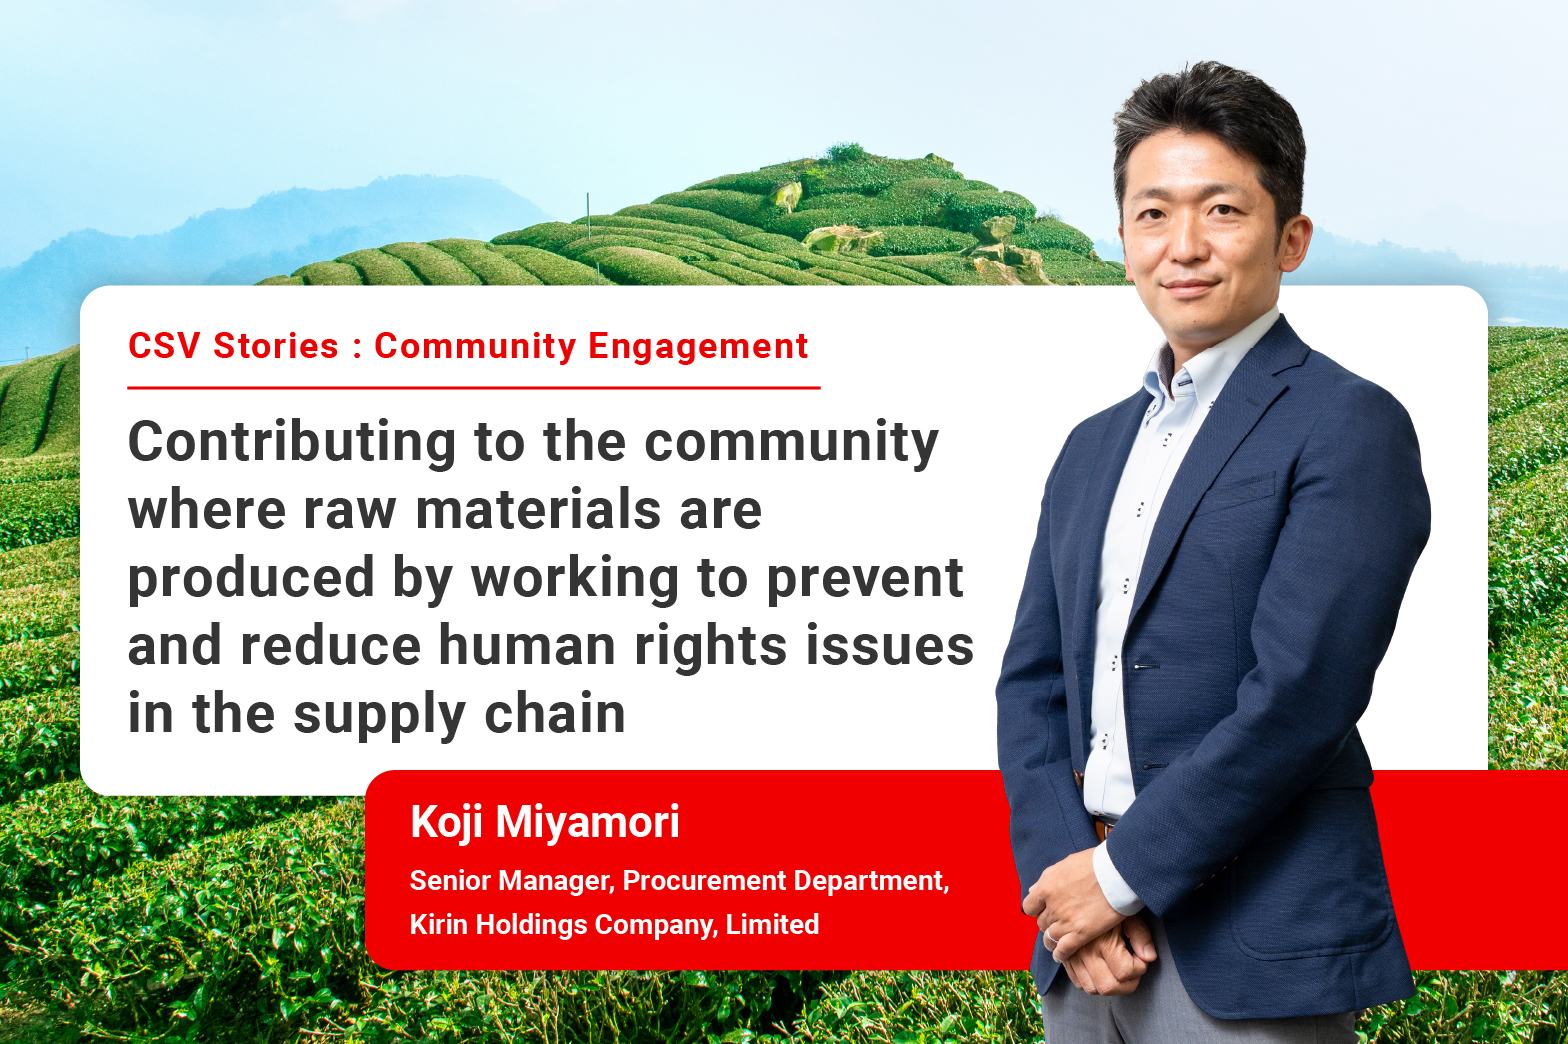 Contributing to the community where raw materials are produced by working to prevent and reduce human rights issues in the supply chain